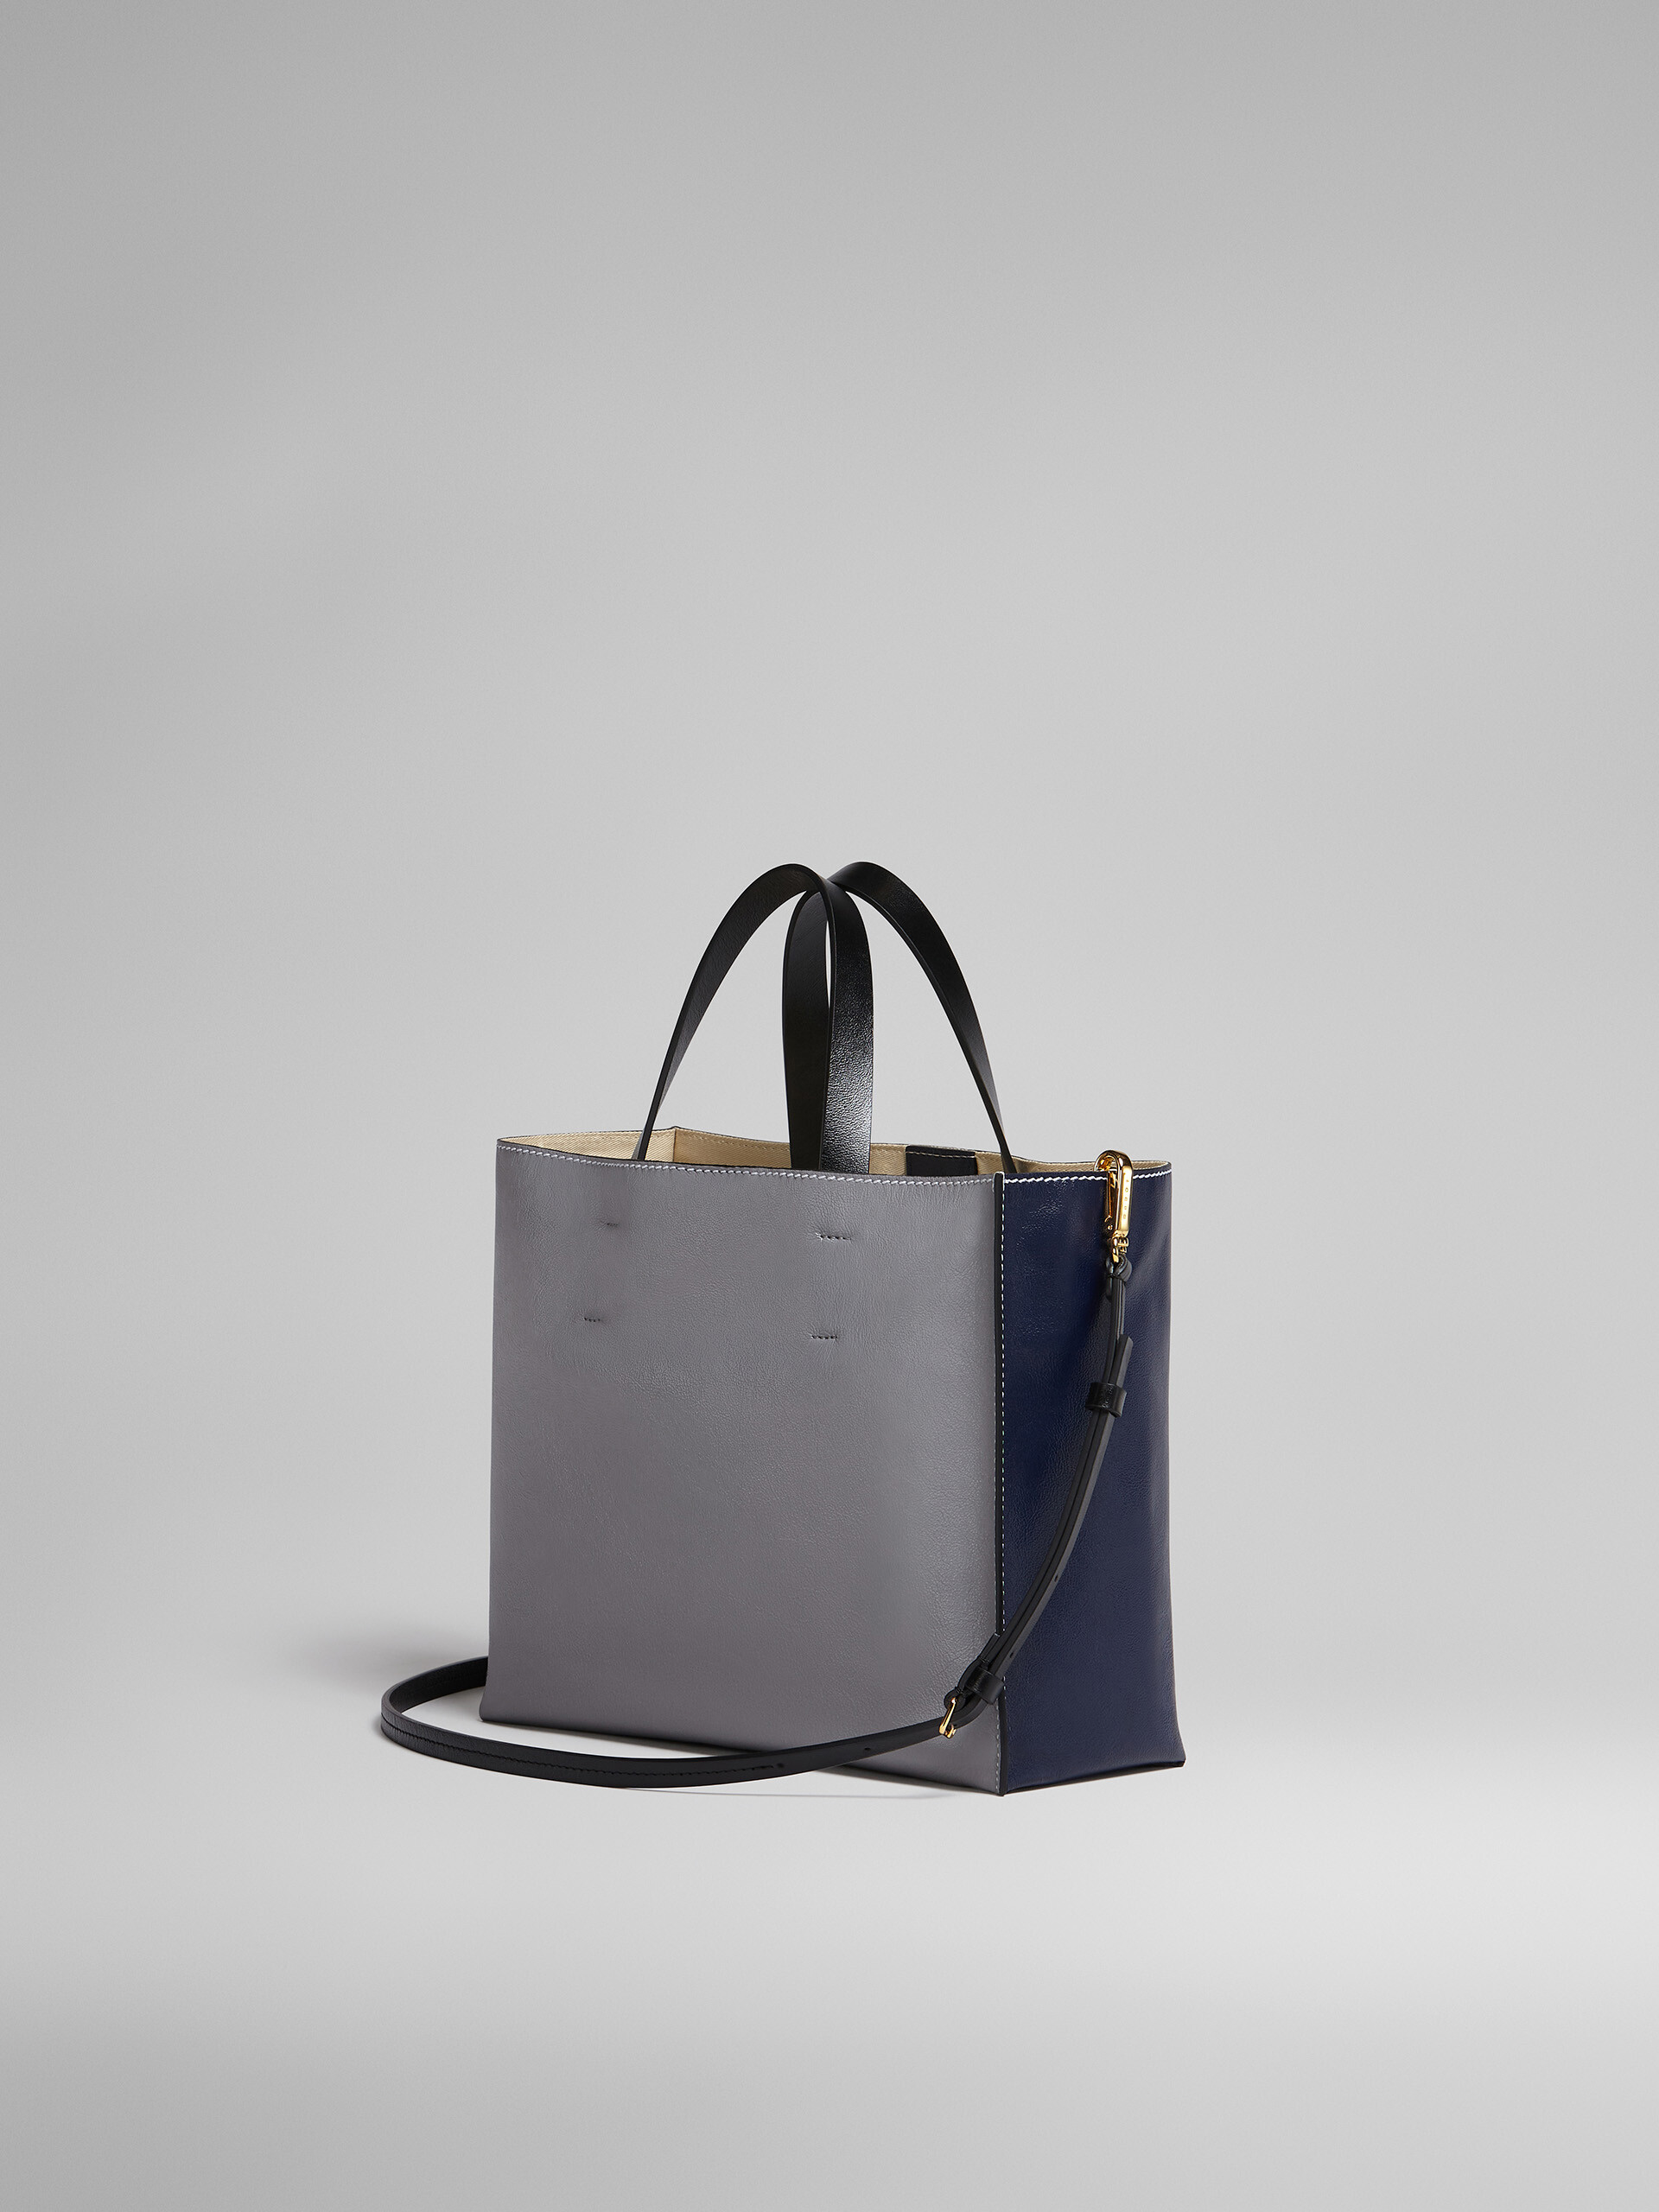 MUSEO SOFT bag in blue and grey leather - Shopping Bags - Image 3